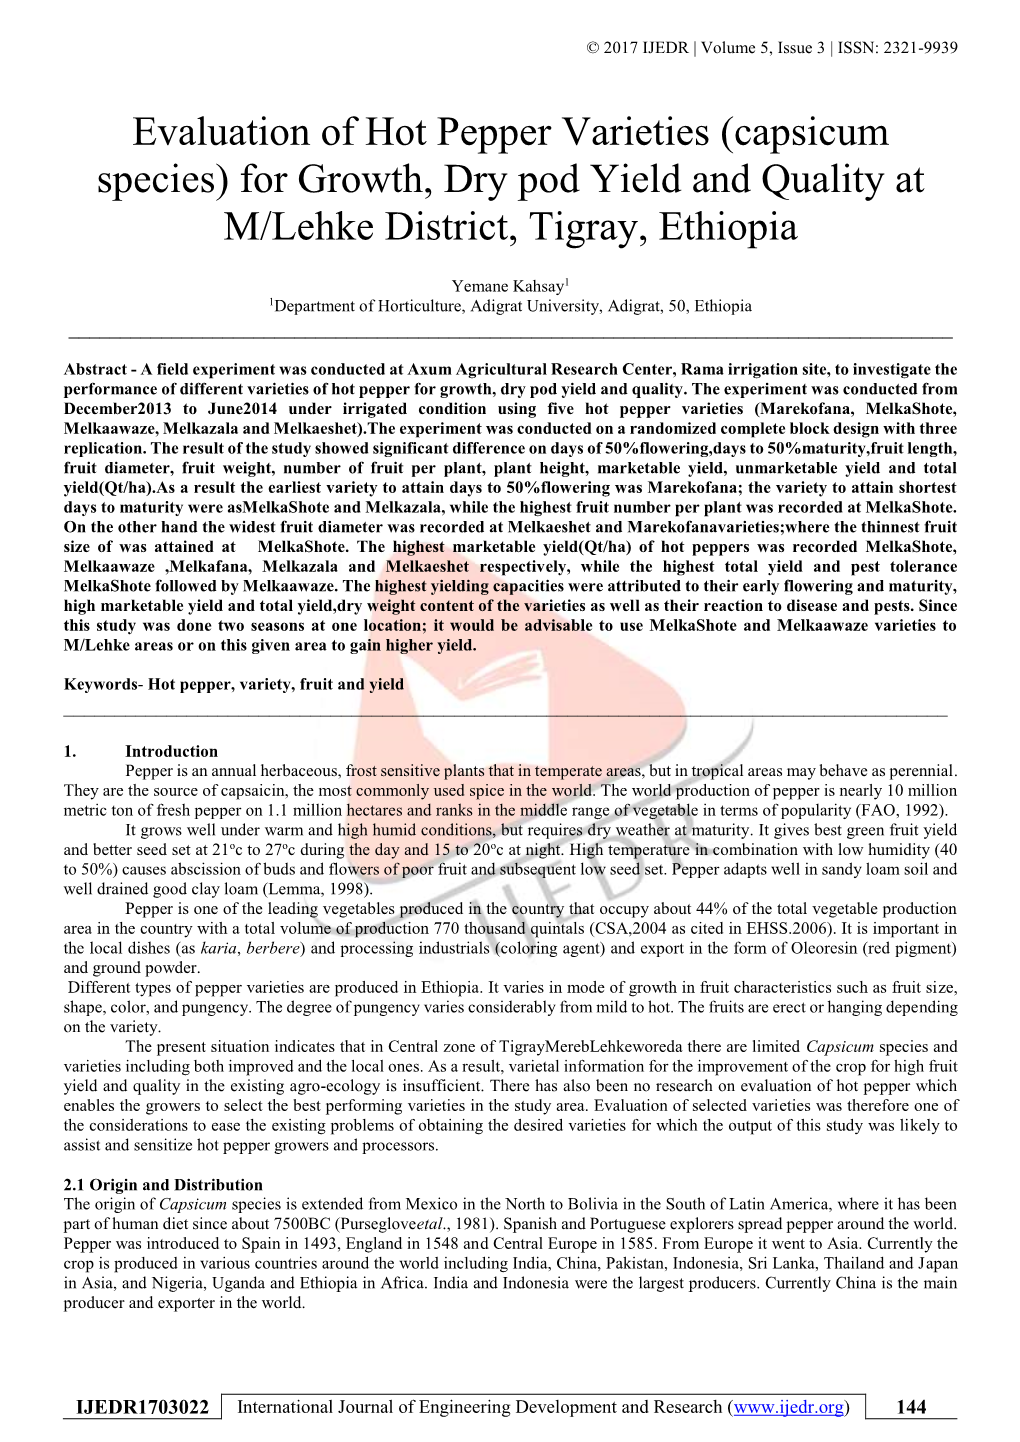 Evaluation of Hot Pepper Varieties (Capsicum Species) for Growth, Dry Pod Yield and Quality at M/Lehke District, Tigray, Ethiopia